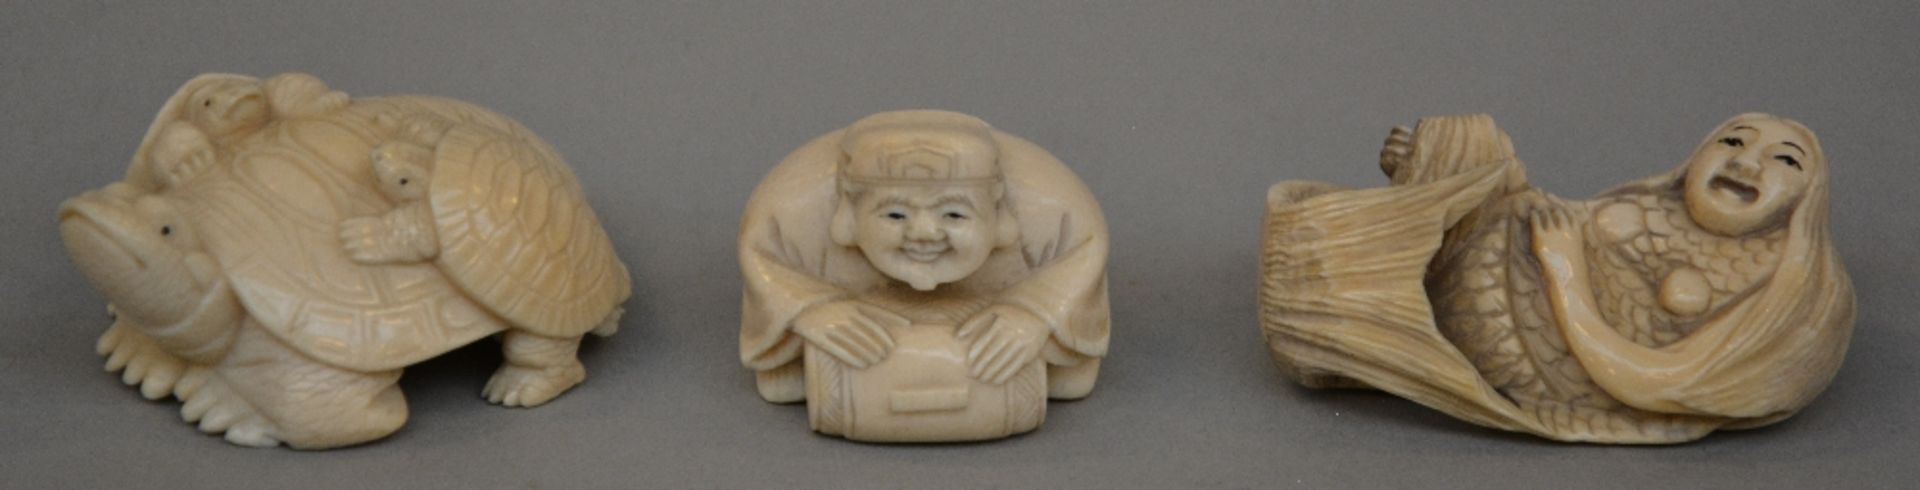 Nine Japanese ivory netsuke, first half of 20thC, H 5,4 - 2,2 cm, Total weight 350 g - Image 4 of 4